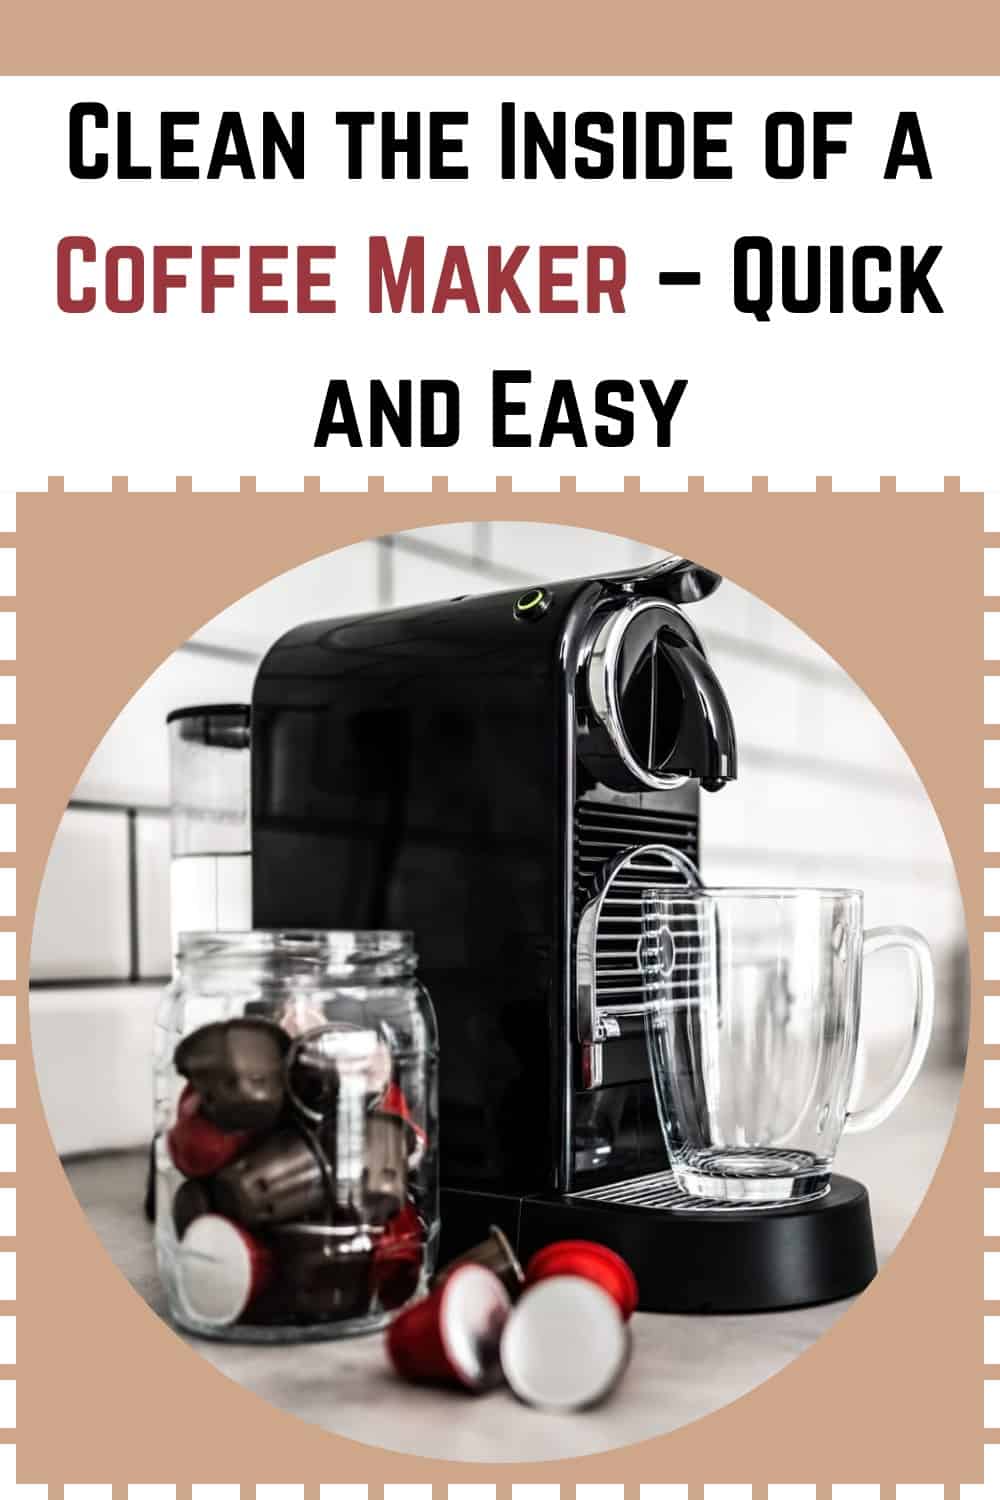 Clean the Inside of a Coffee Maker Quick and Easy